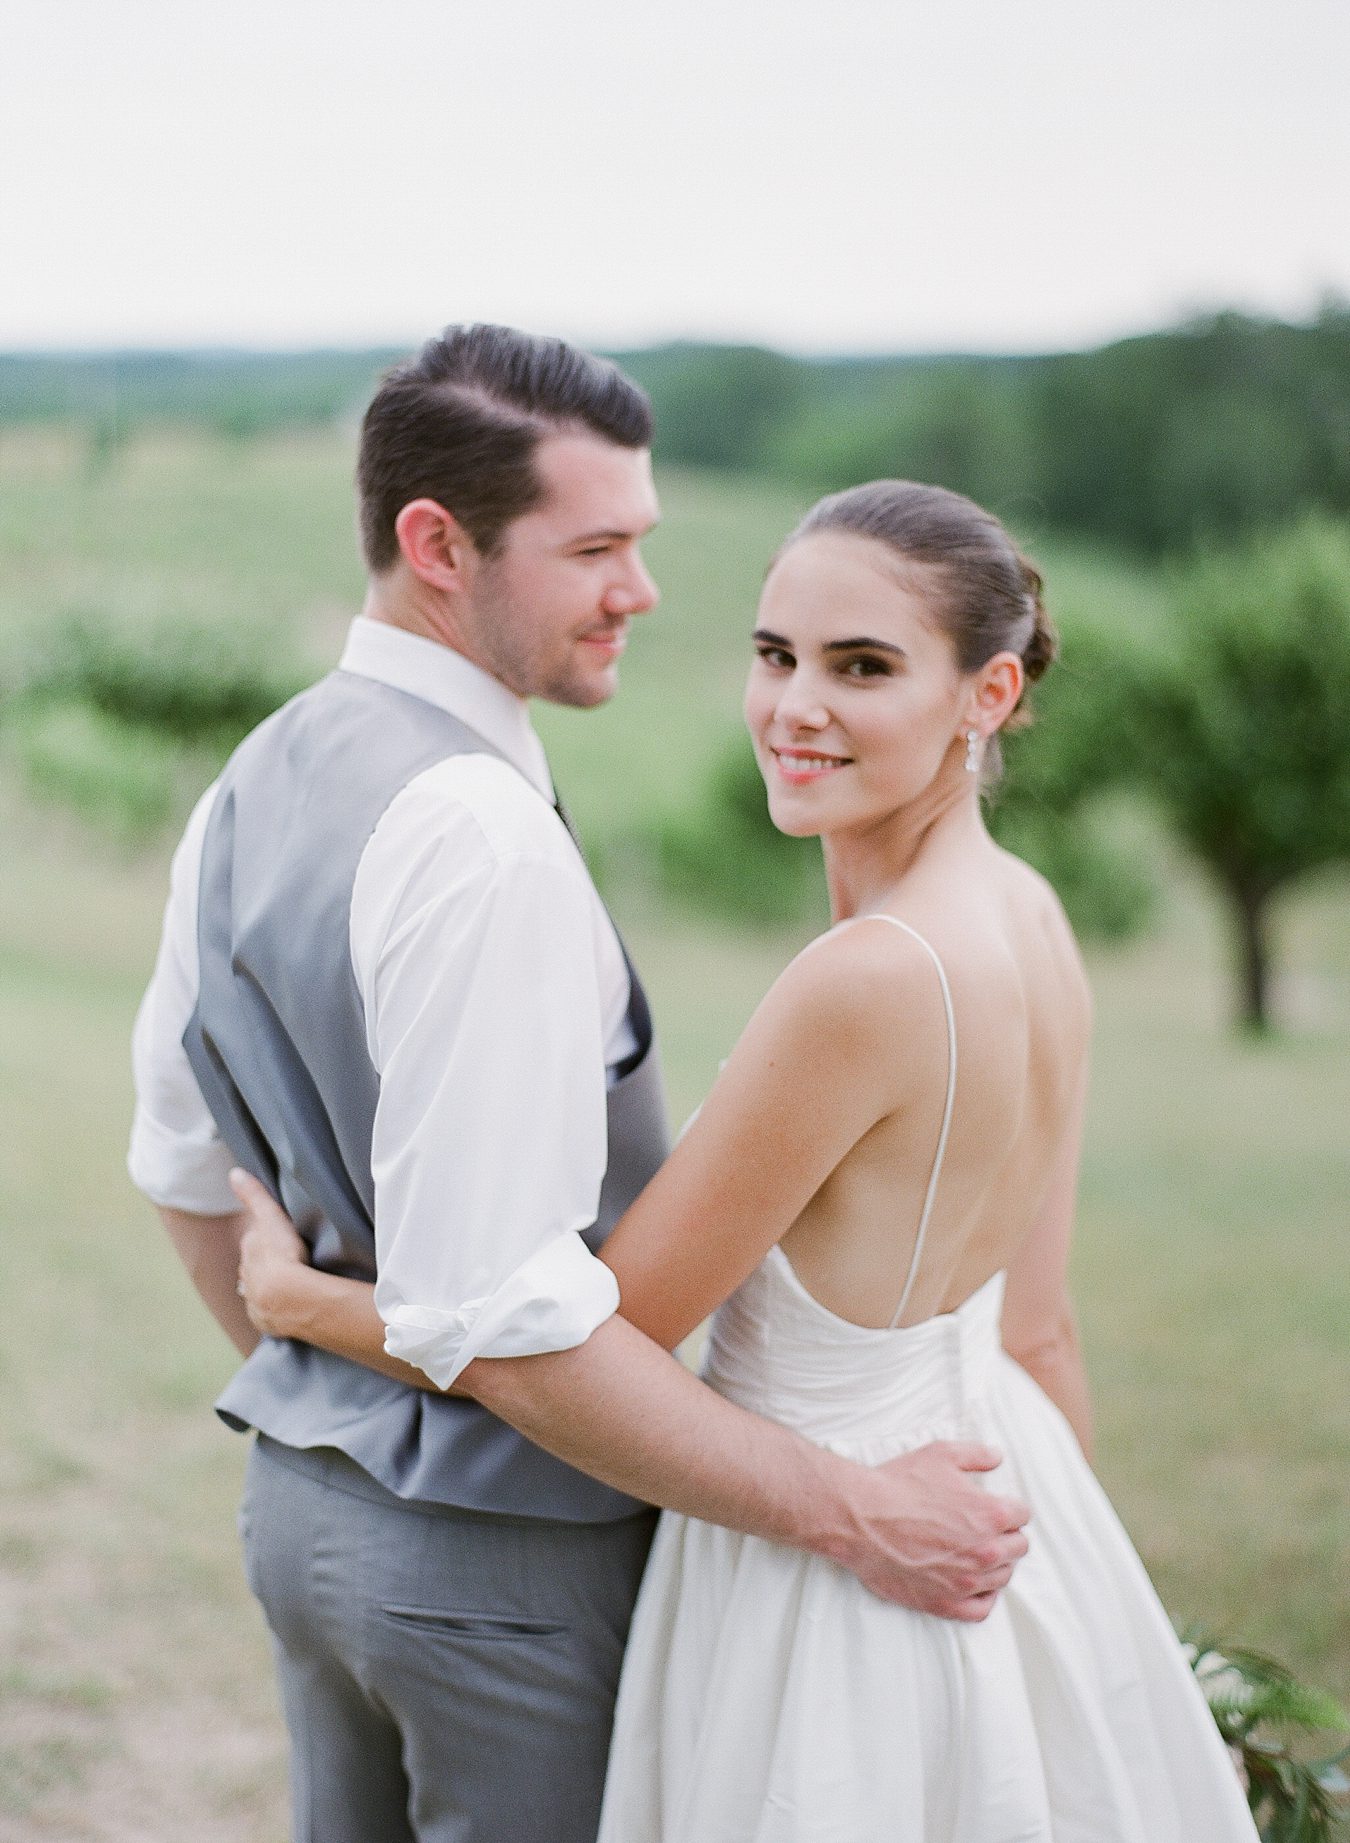 Traverse City Mi Wedding Photography | Cory Weber Photography | Sincerely, Ginger Event Design & Production